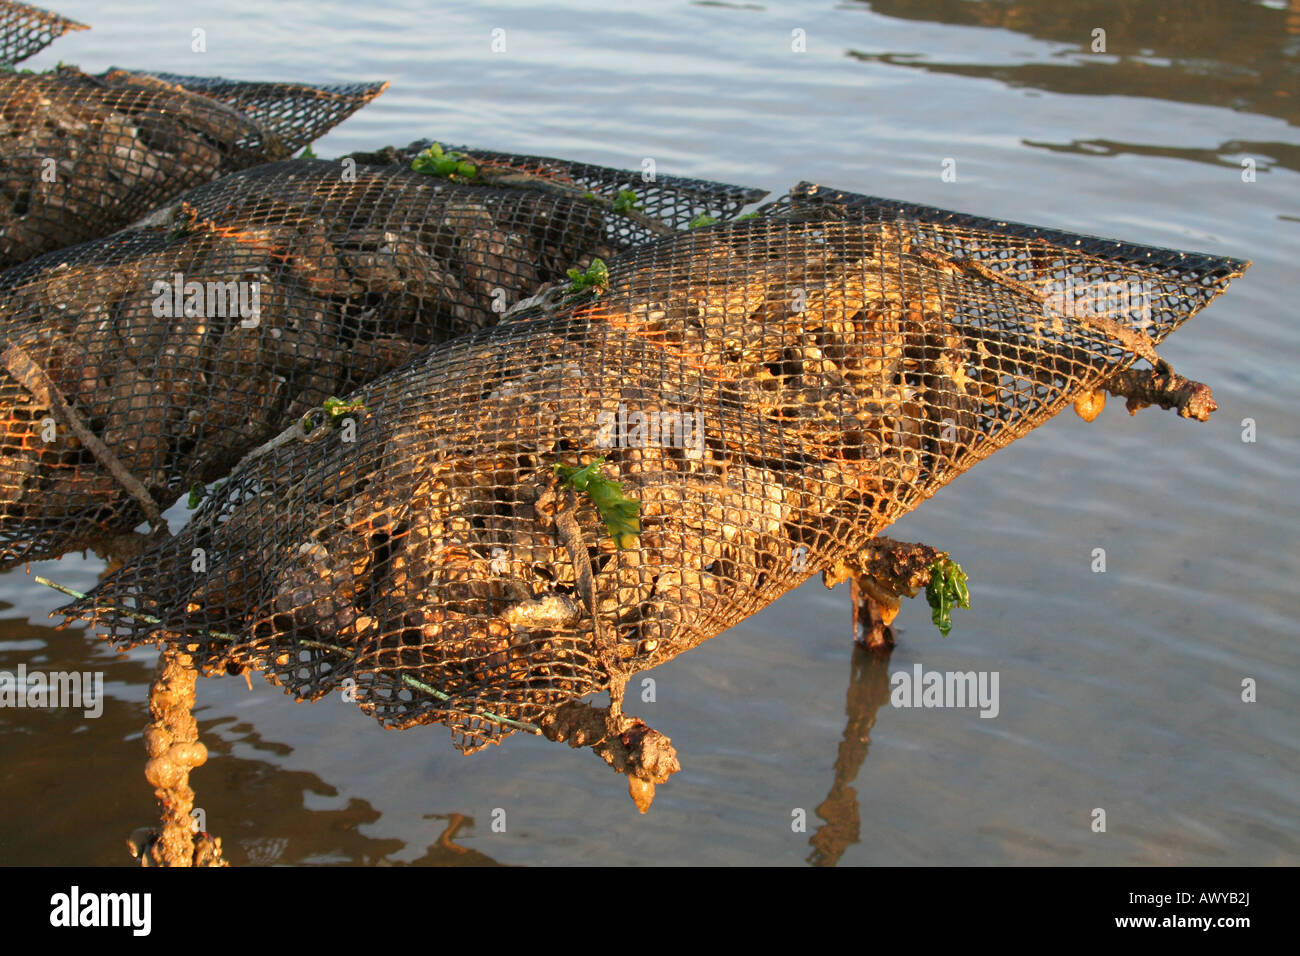 Oysters growing in rope mesh bags 'pillow cases' on an oyster park in Normandy France Stock Photo